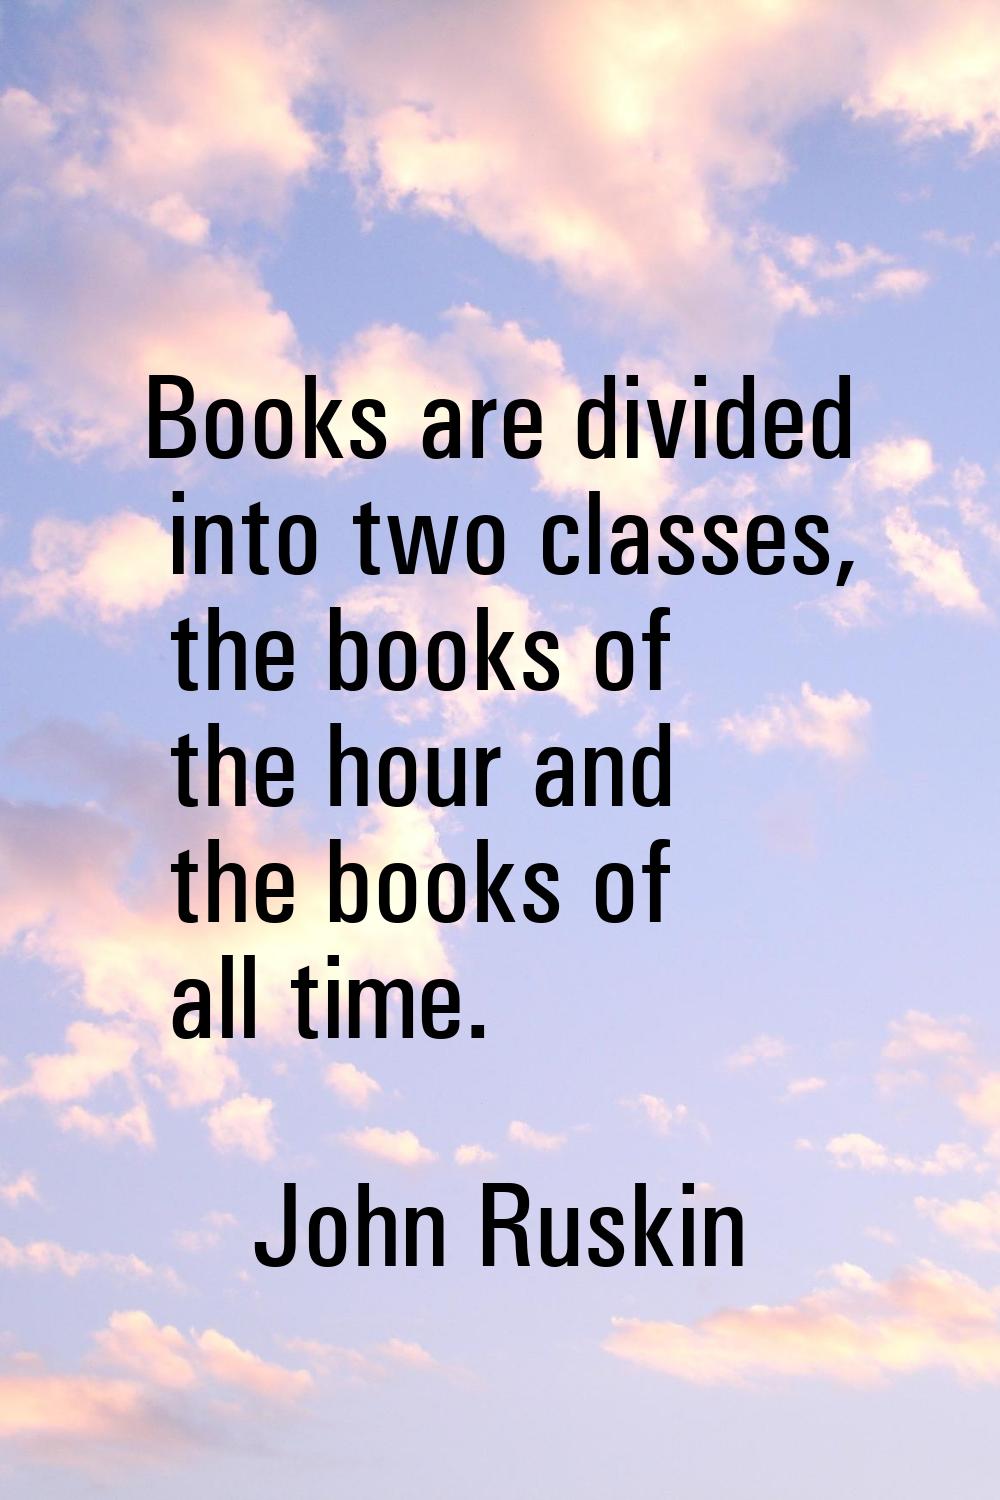 Books are divided into two classes, the books of the hour and the books of all time.